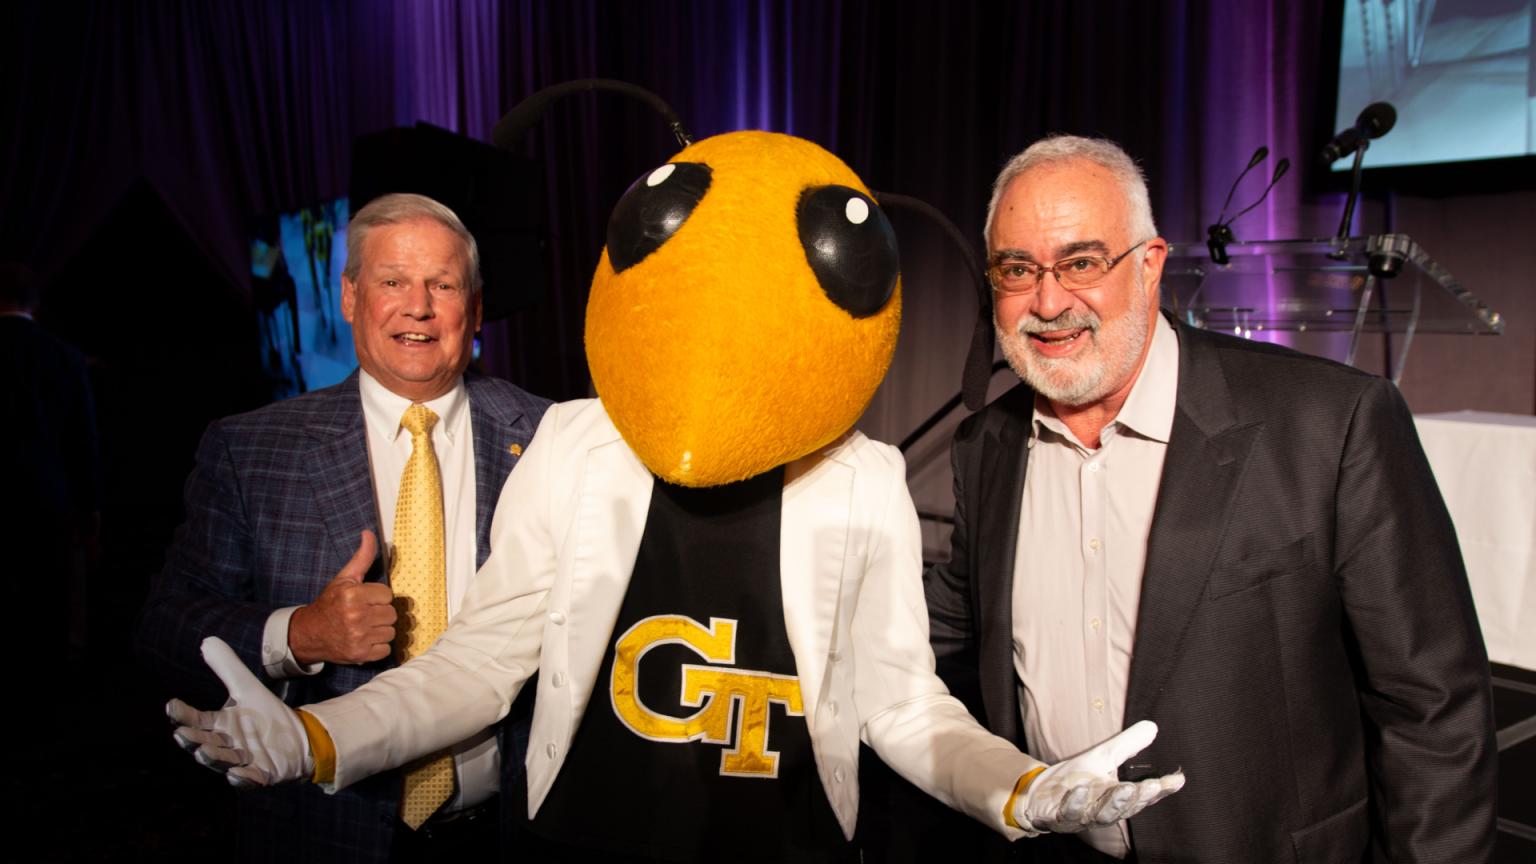 Building Construction industry leaders posing with Buzz.